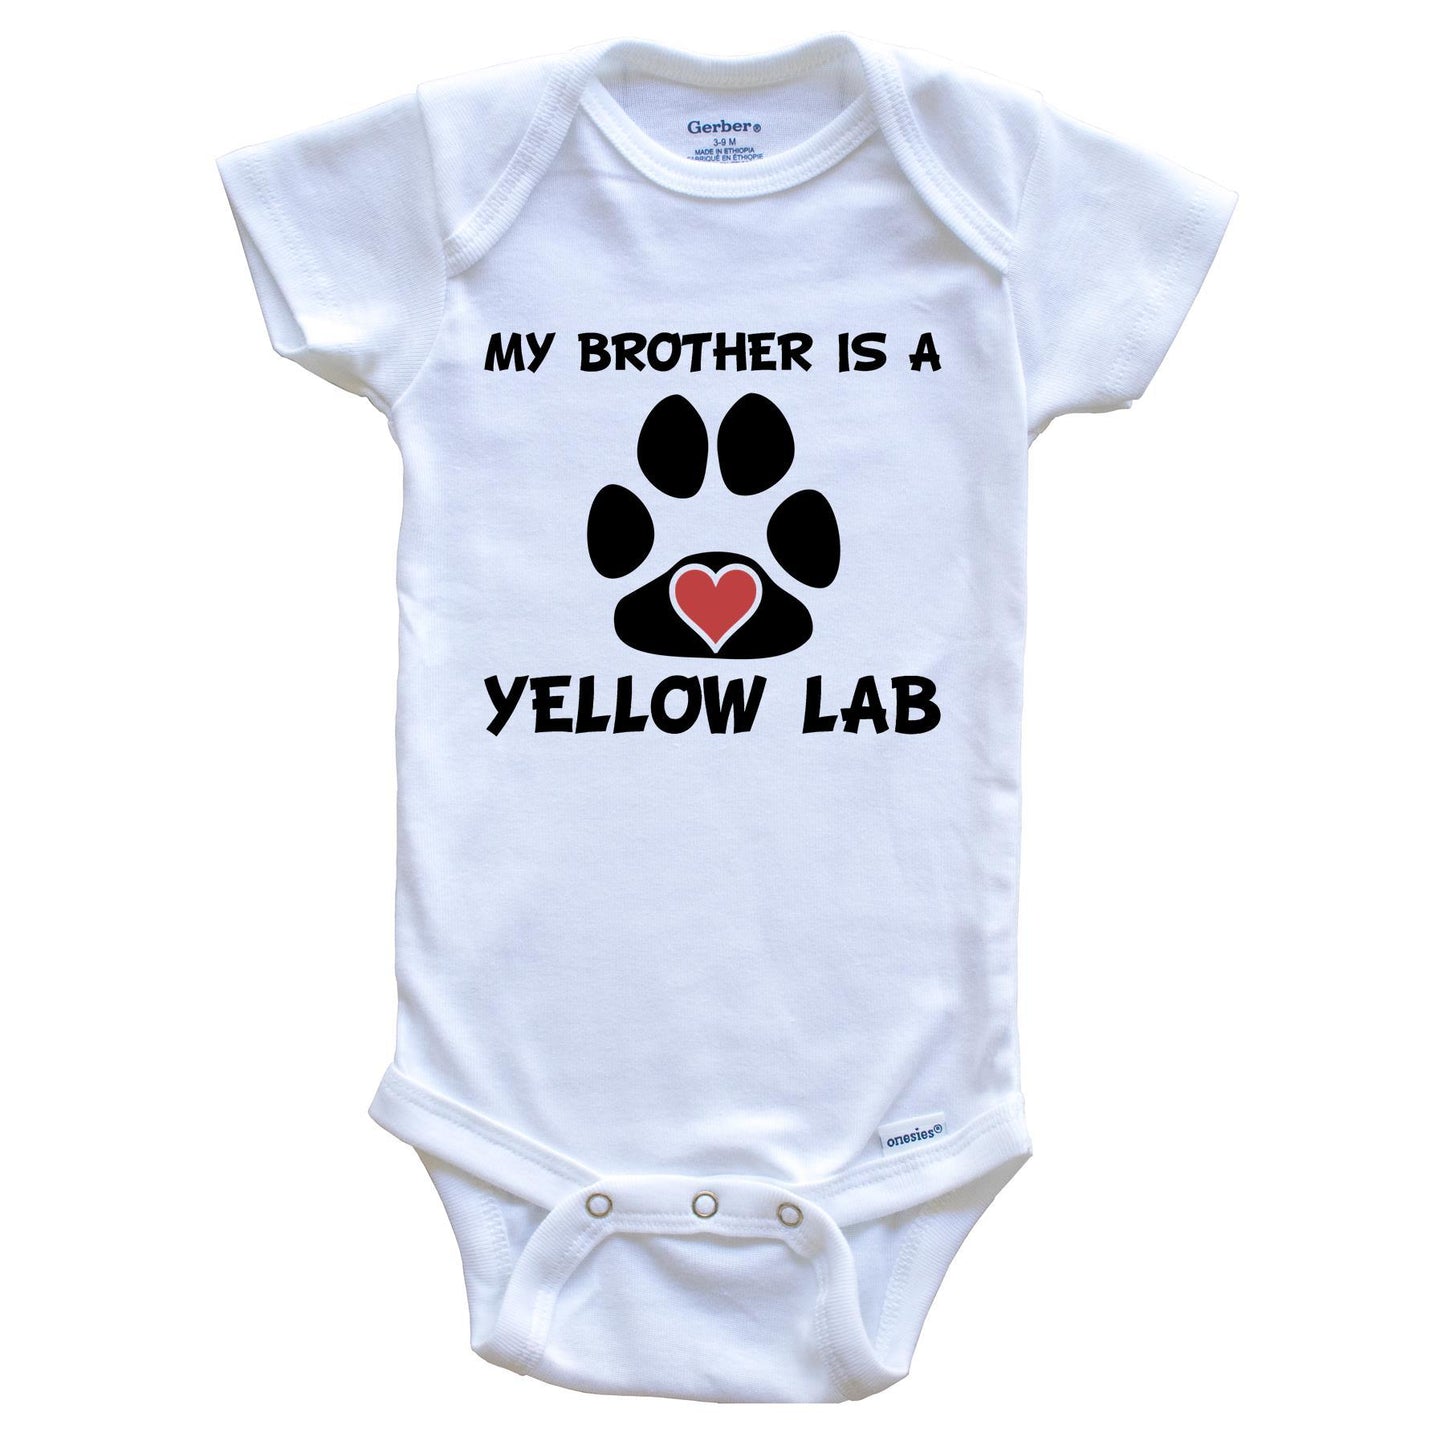 My Brother Is A Yellow Lab Baby Onesie